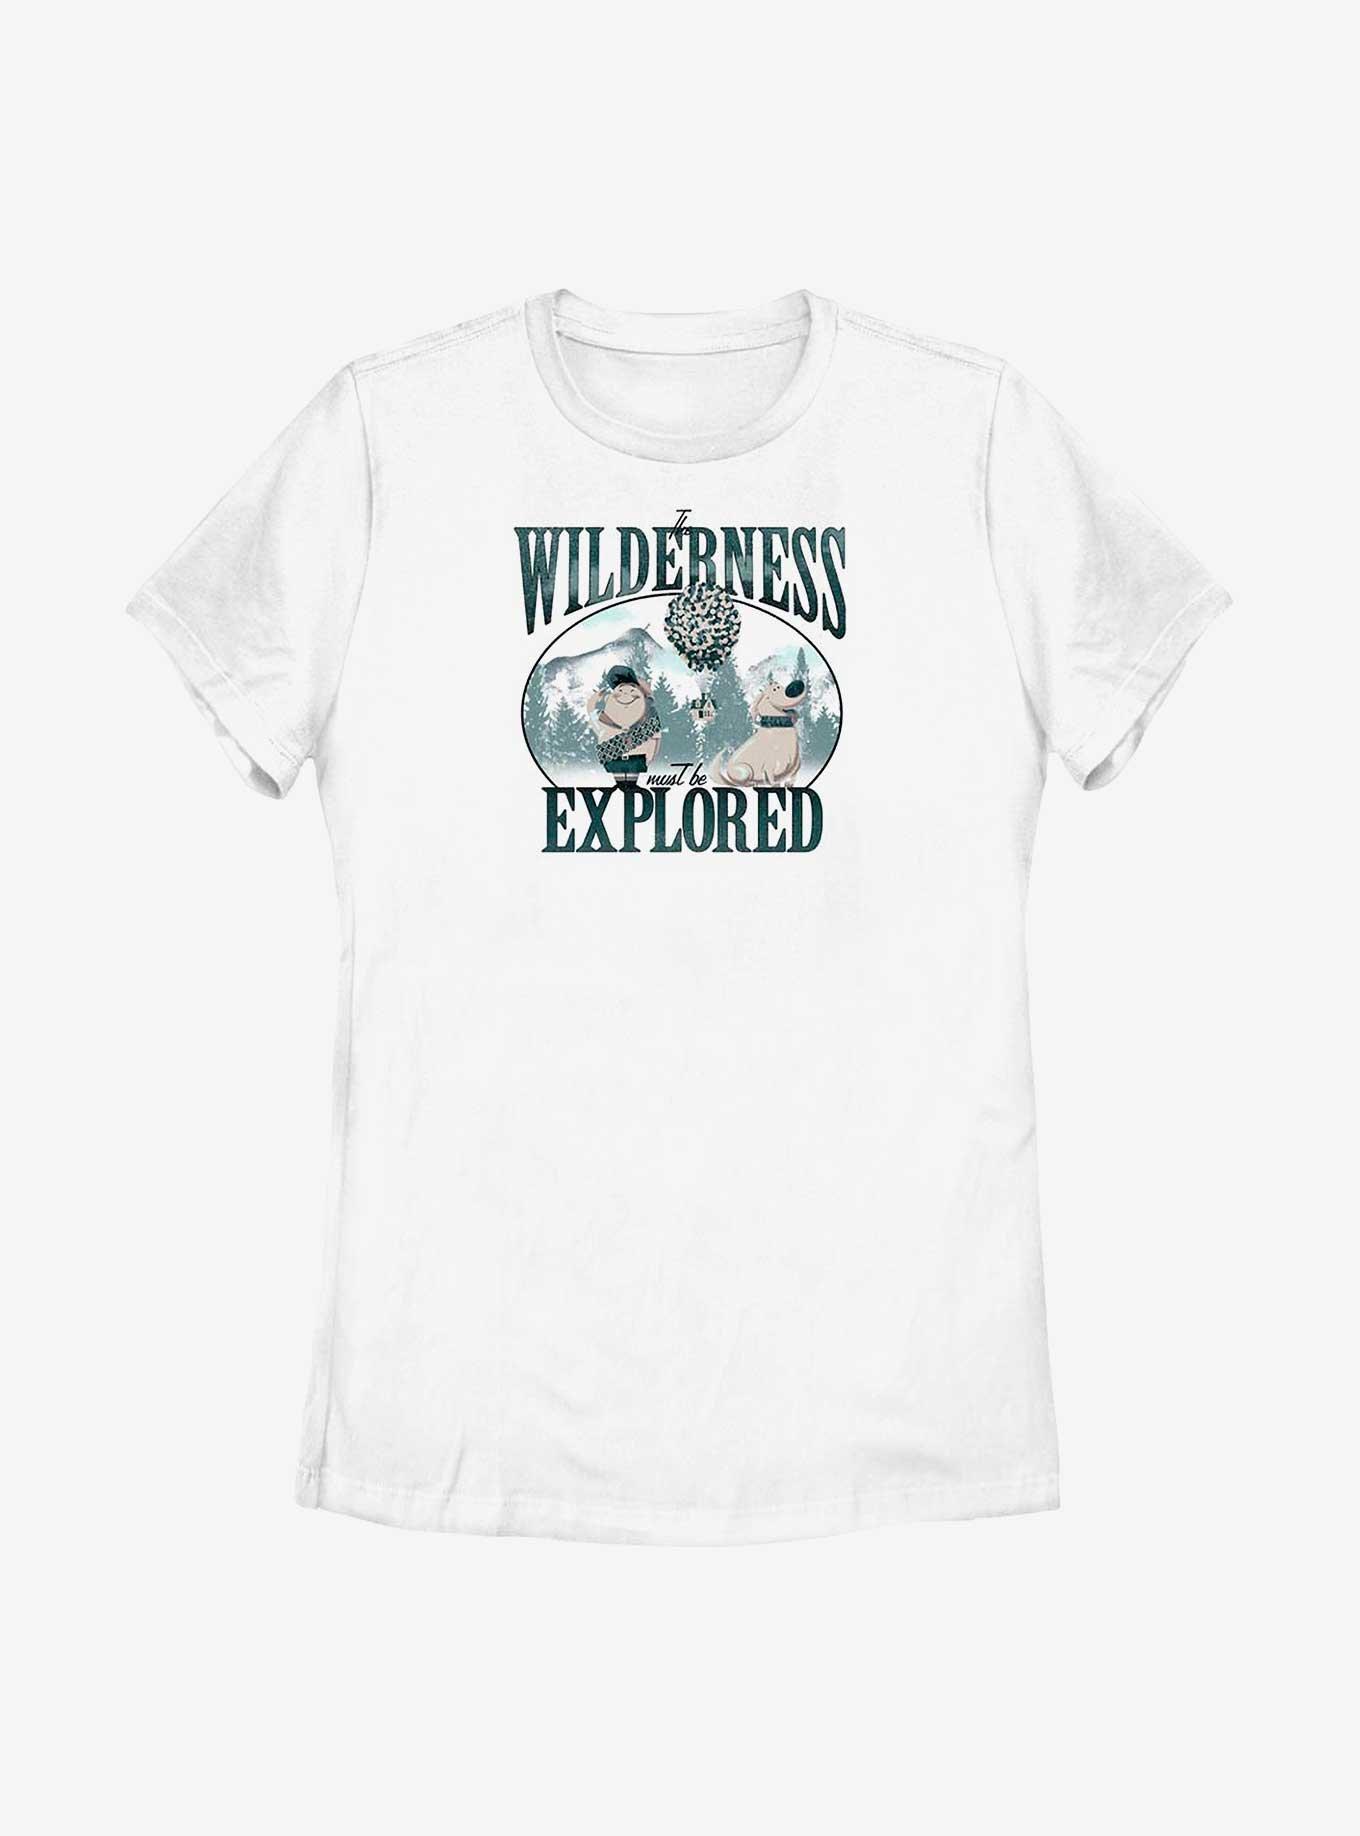 Disney Pixar Up Russell and Dug Wilderness Explored Womens T-Shirt, WHITE, hi-res